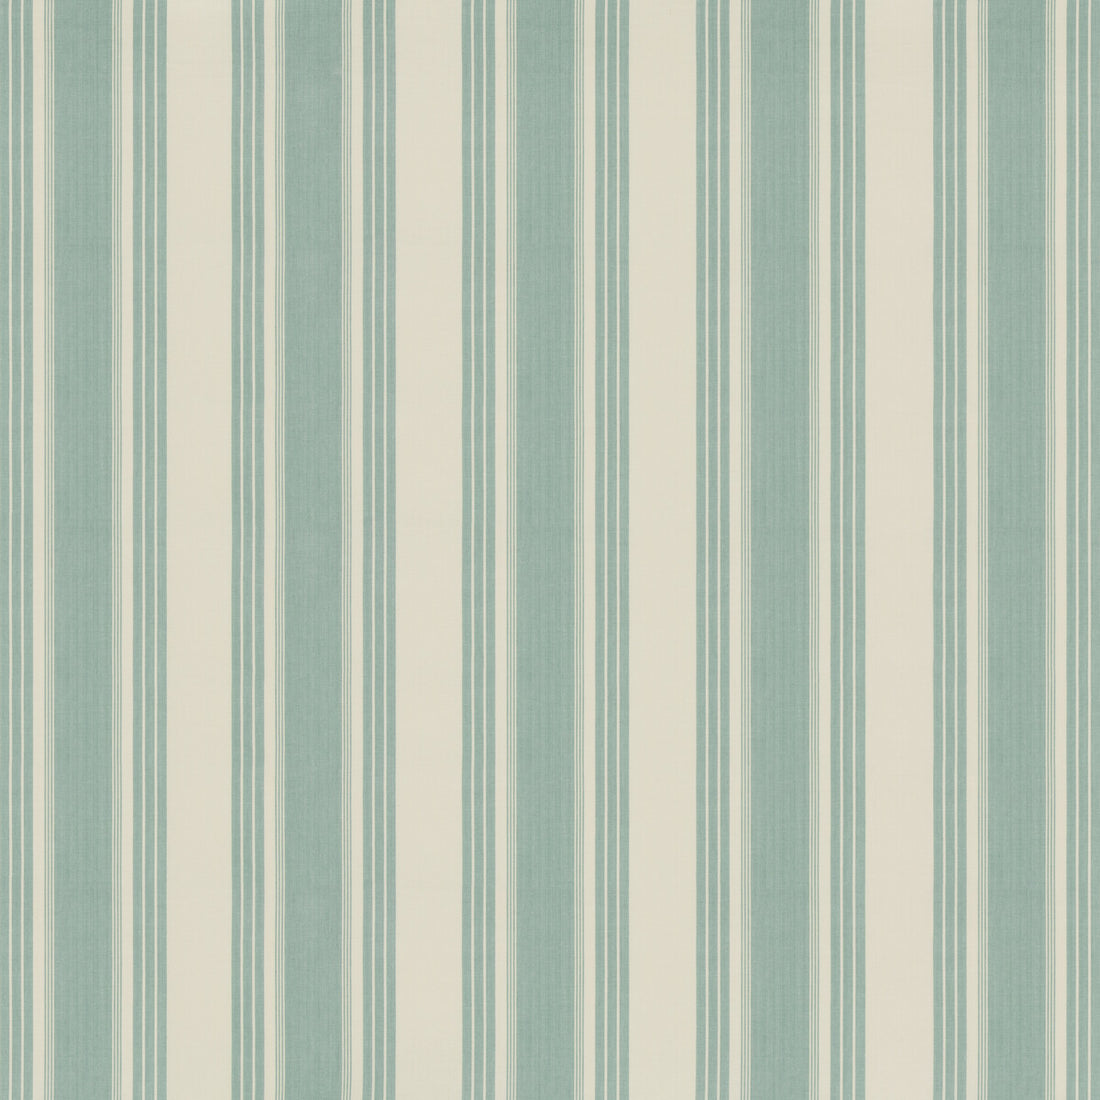 Colmar Stripe fabric in aqua color - pattern 8019110.13.0 - by Brunschwig &amp; Fils in the Folio Francais collection